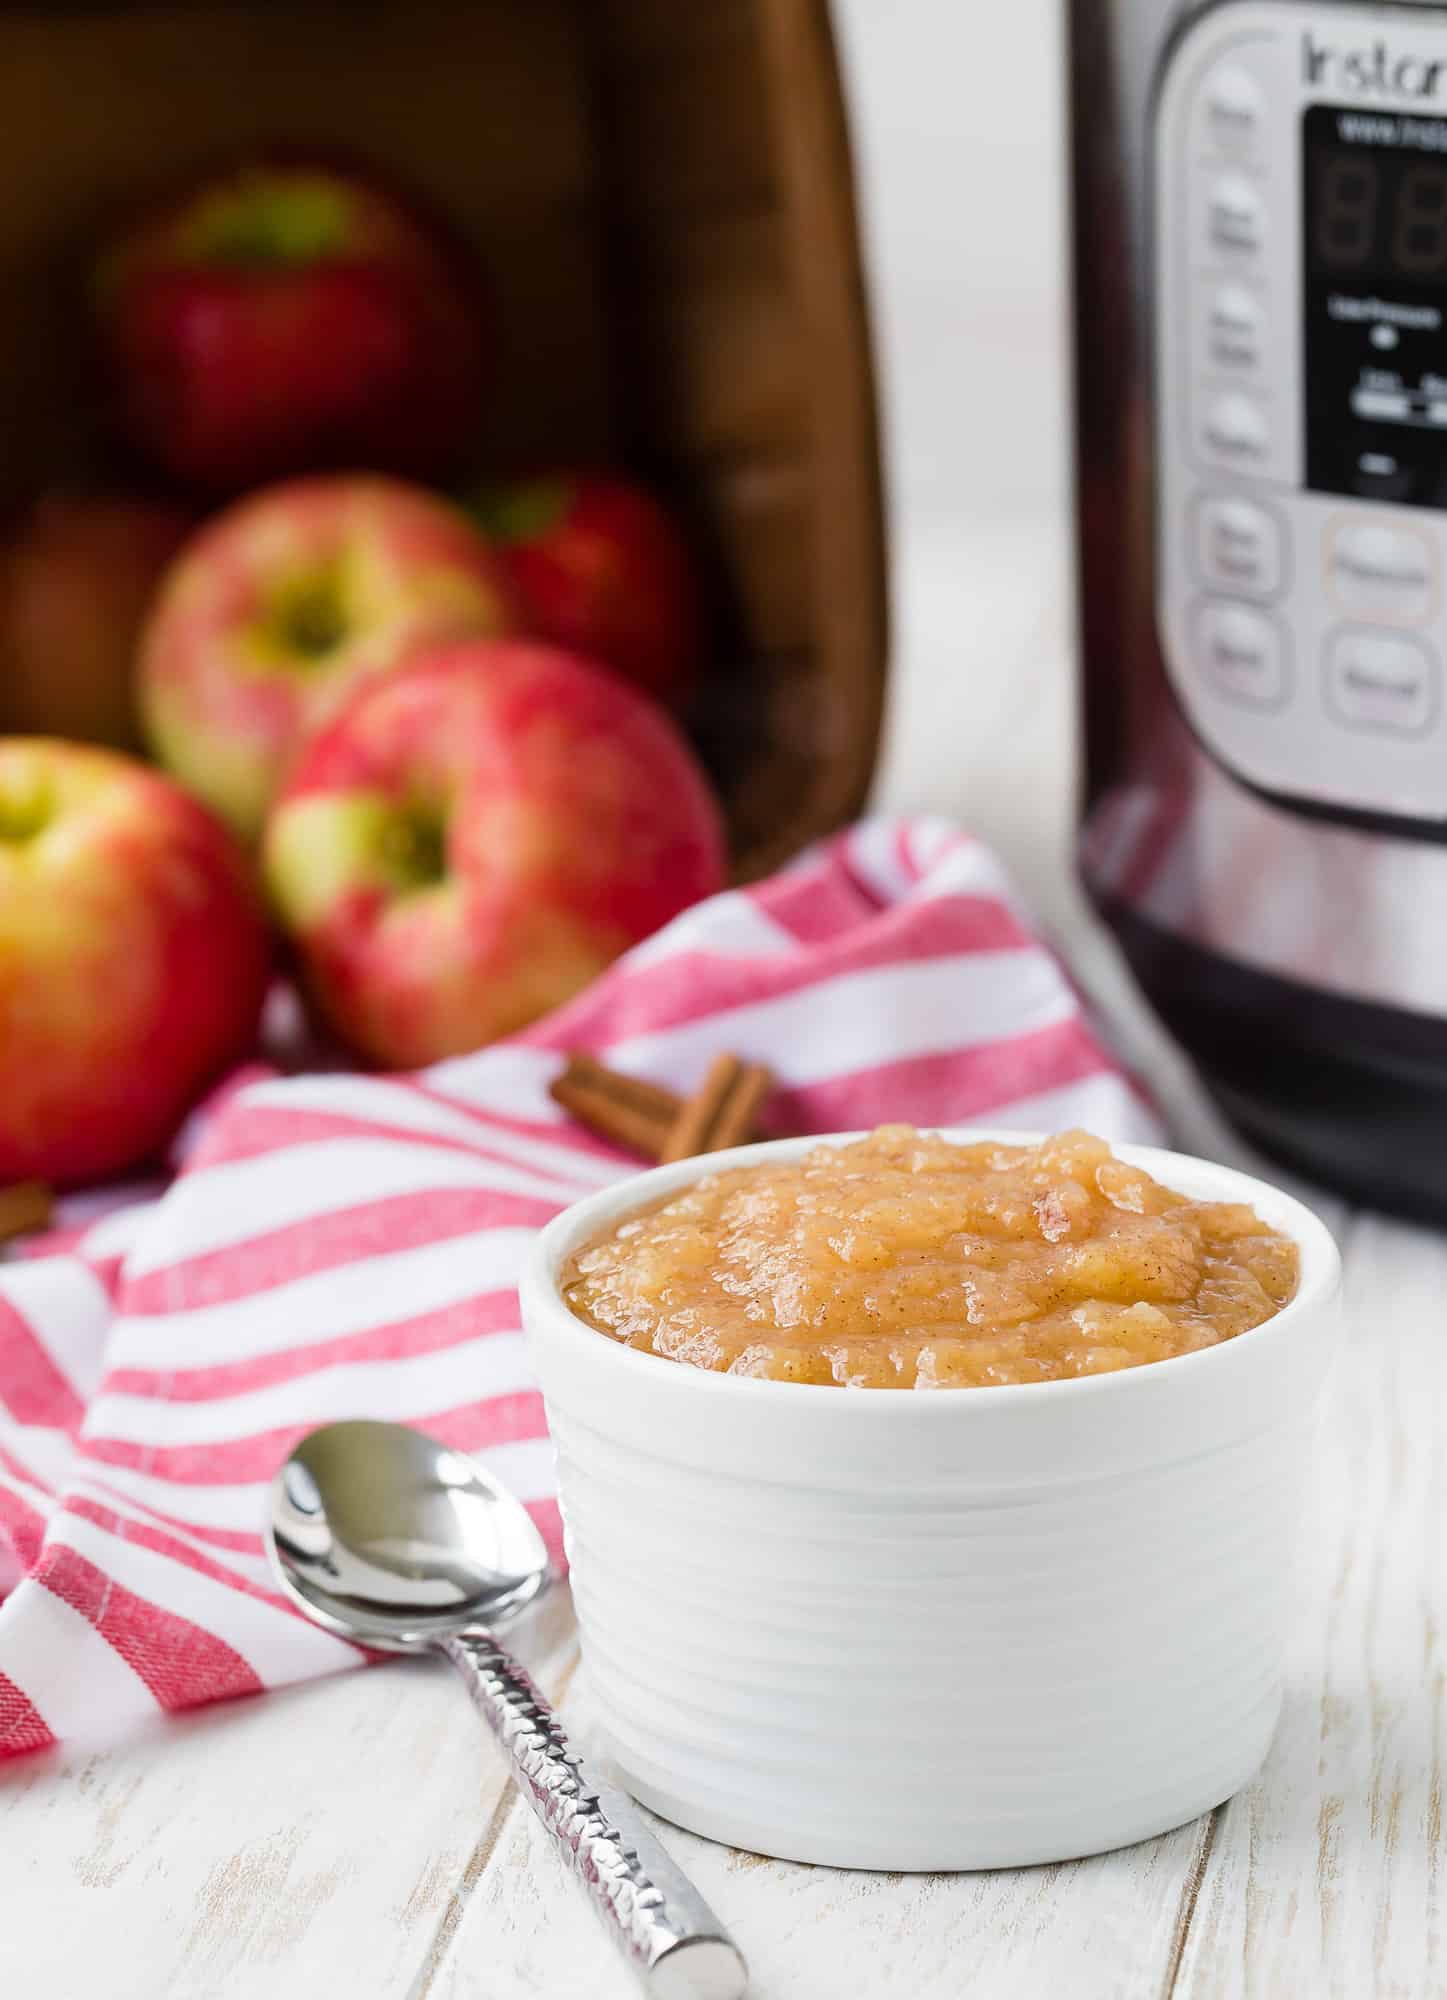 Applesauce in front of an Instant Pot.